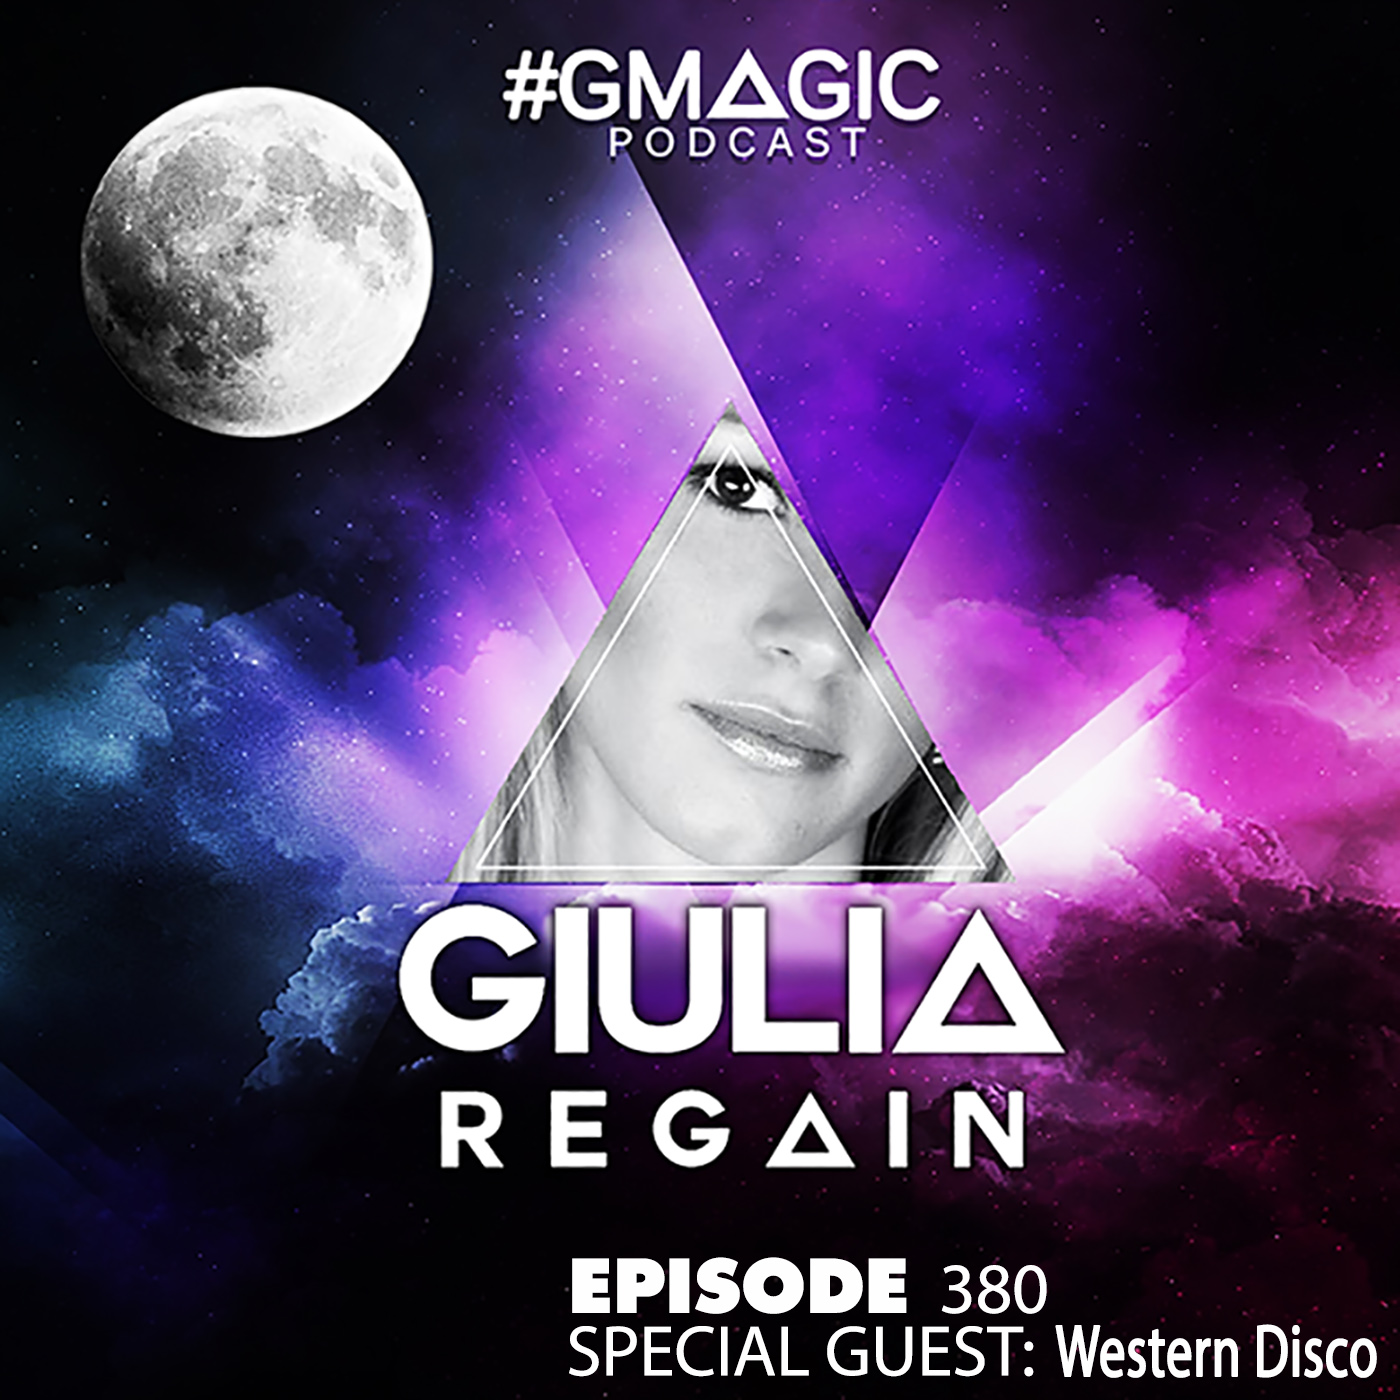 #Gmagic podcast 380-Special Guest: Western Disco